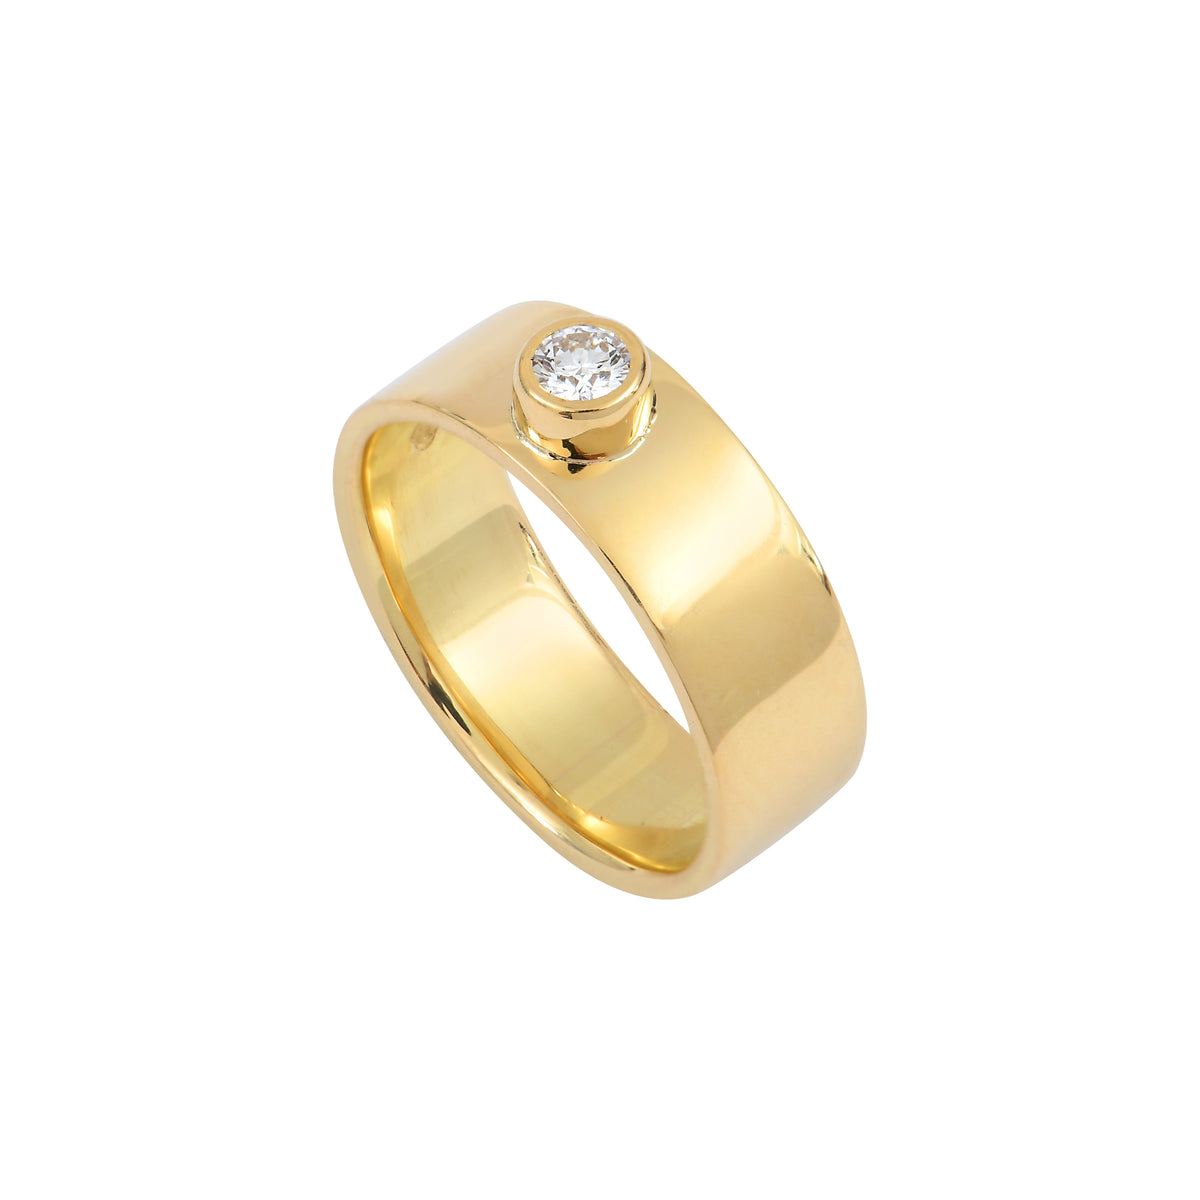 6 mm ring in Fairmined gold 